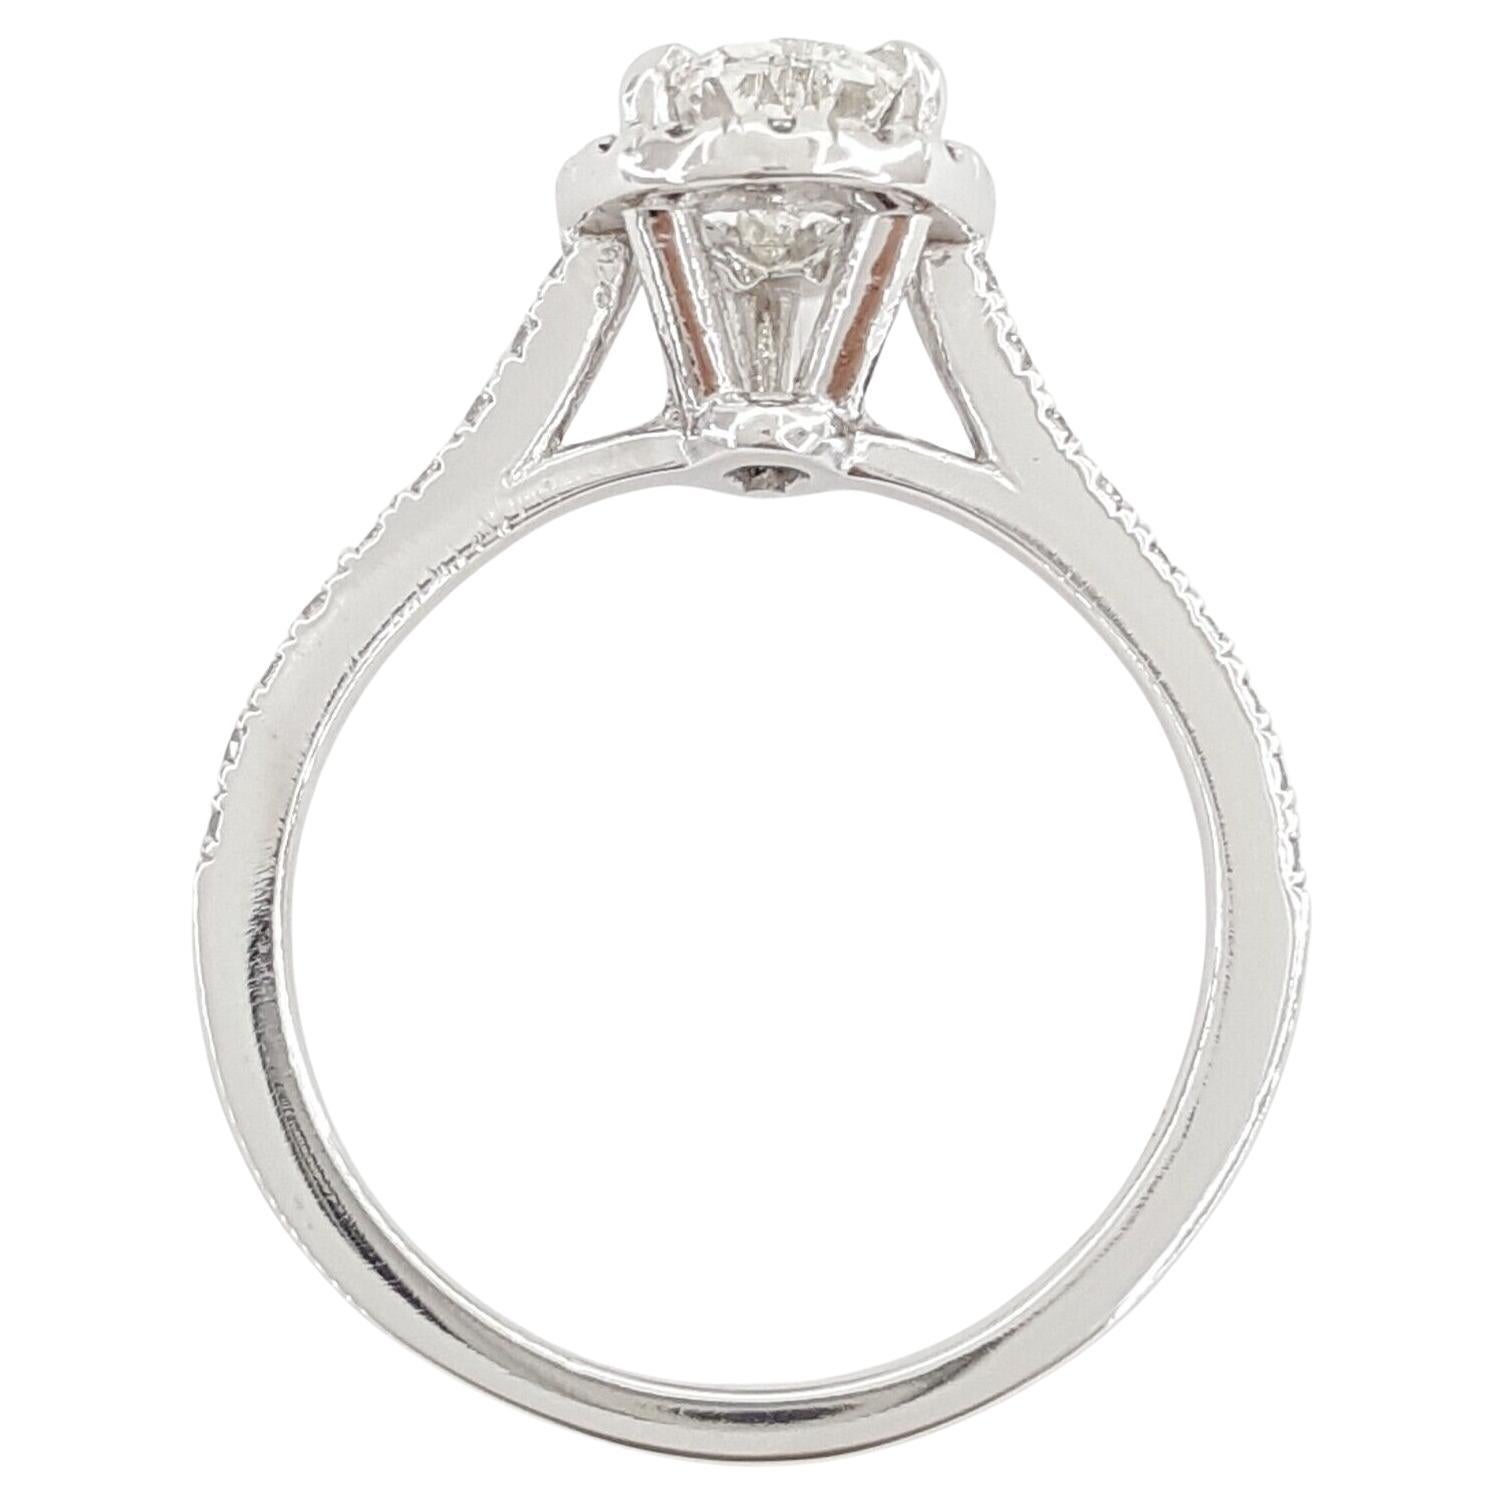 0.91 ct Pear Brilliant Cut Diamond Halo Engagement Ring in Platinum. 
The ring weighs 5.3 grams, size 6, the center stone is a Natural 0.91 ct Pear Brilliant Cut Diamond, G in color, VS2 in clarity, Good Polish, Good Symmetry, with measurements of